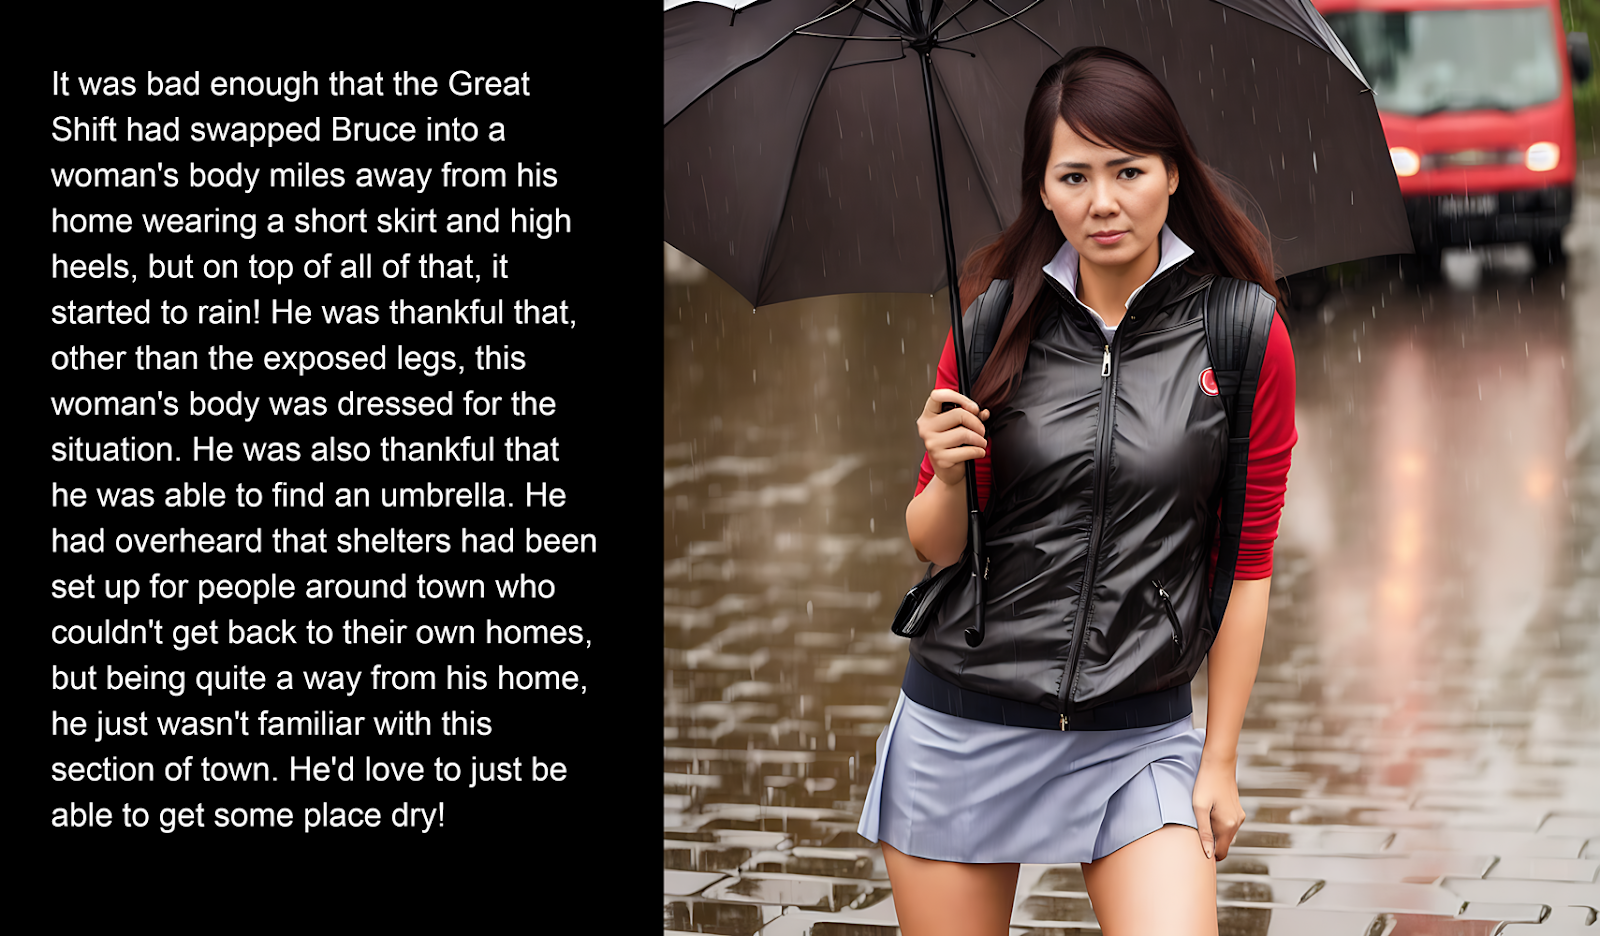 It was bad enough that the Great Shift had swapped Bruce into a woman's body miles away from his home wearing a short skirt and high heels, but on top of all of that, it started to rain! He was thankful that, other than the exposed legs, this woman's body was dressed for the situation. He was also thankful that he was able to find an umbrella. He had overheard that shelters had been set up for people around town who couldn't get back to their own homes, but being quite a way from his home, he just wasn't familiar with this section of town. He'd love to just be able to get some place dry!